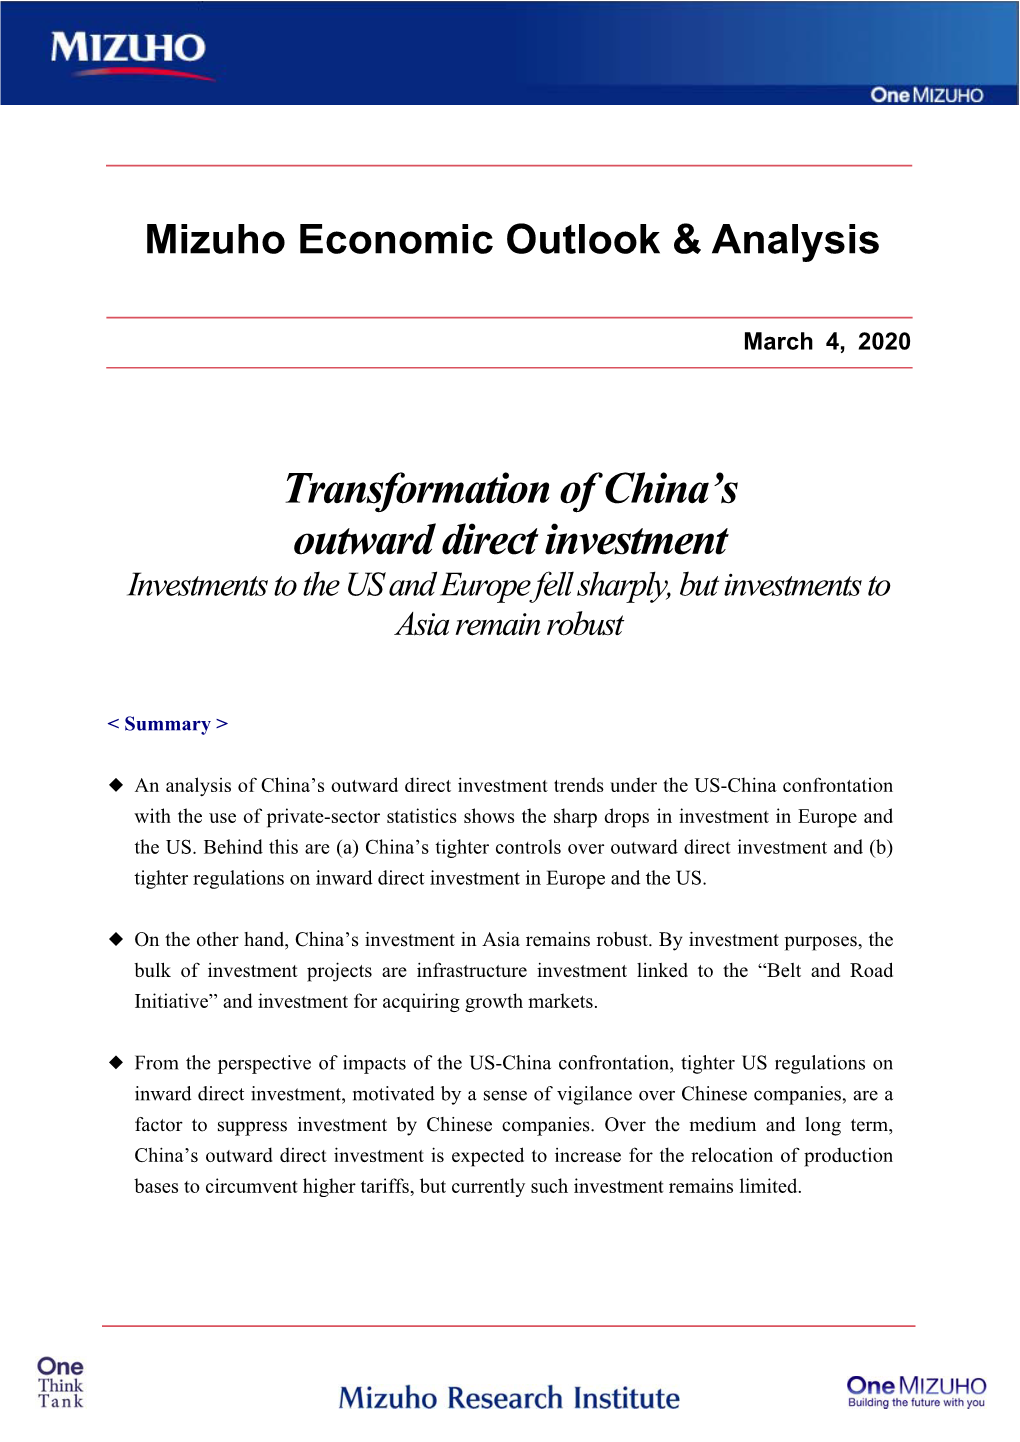 Transformation of China's Outward Direct Investment